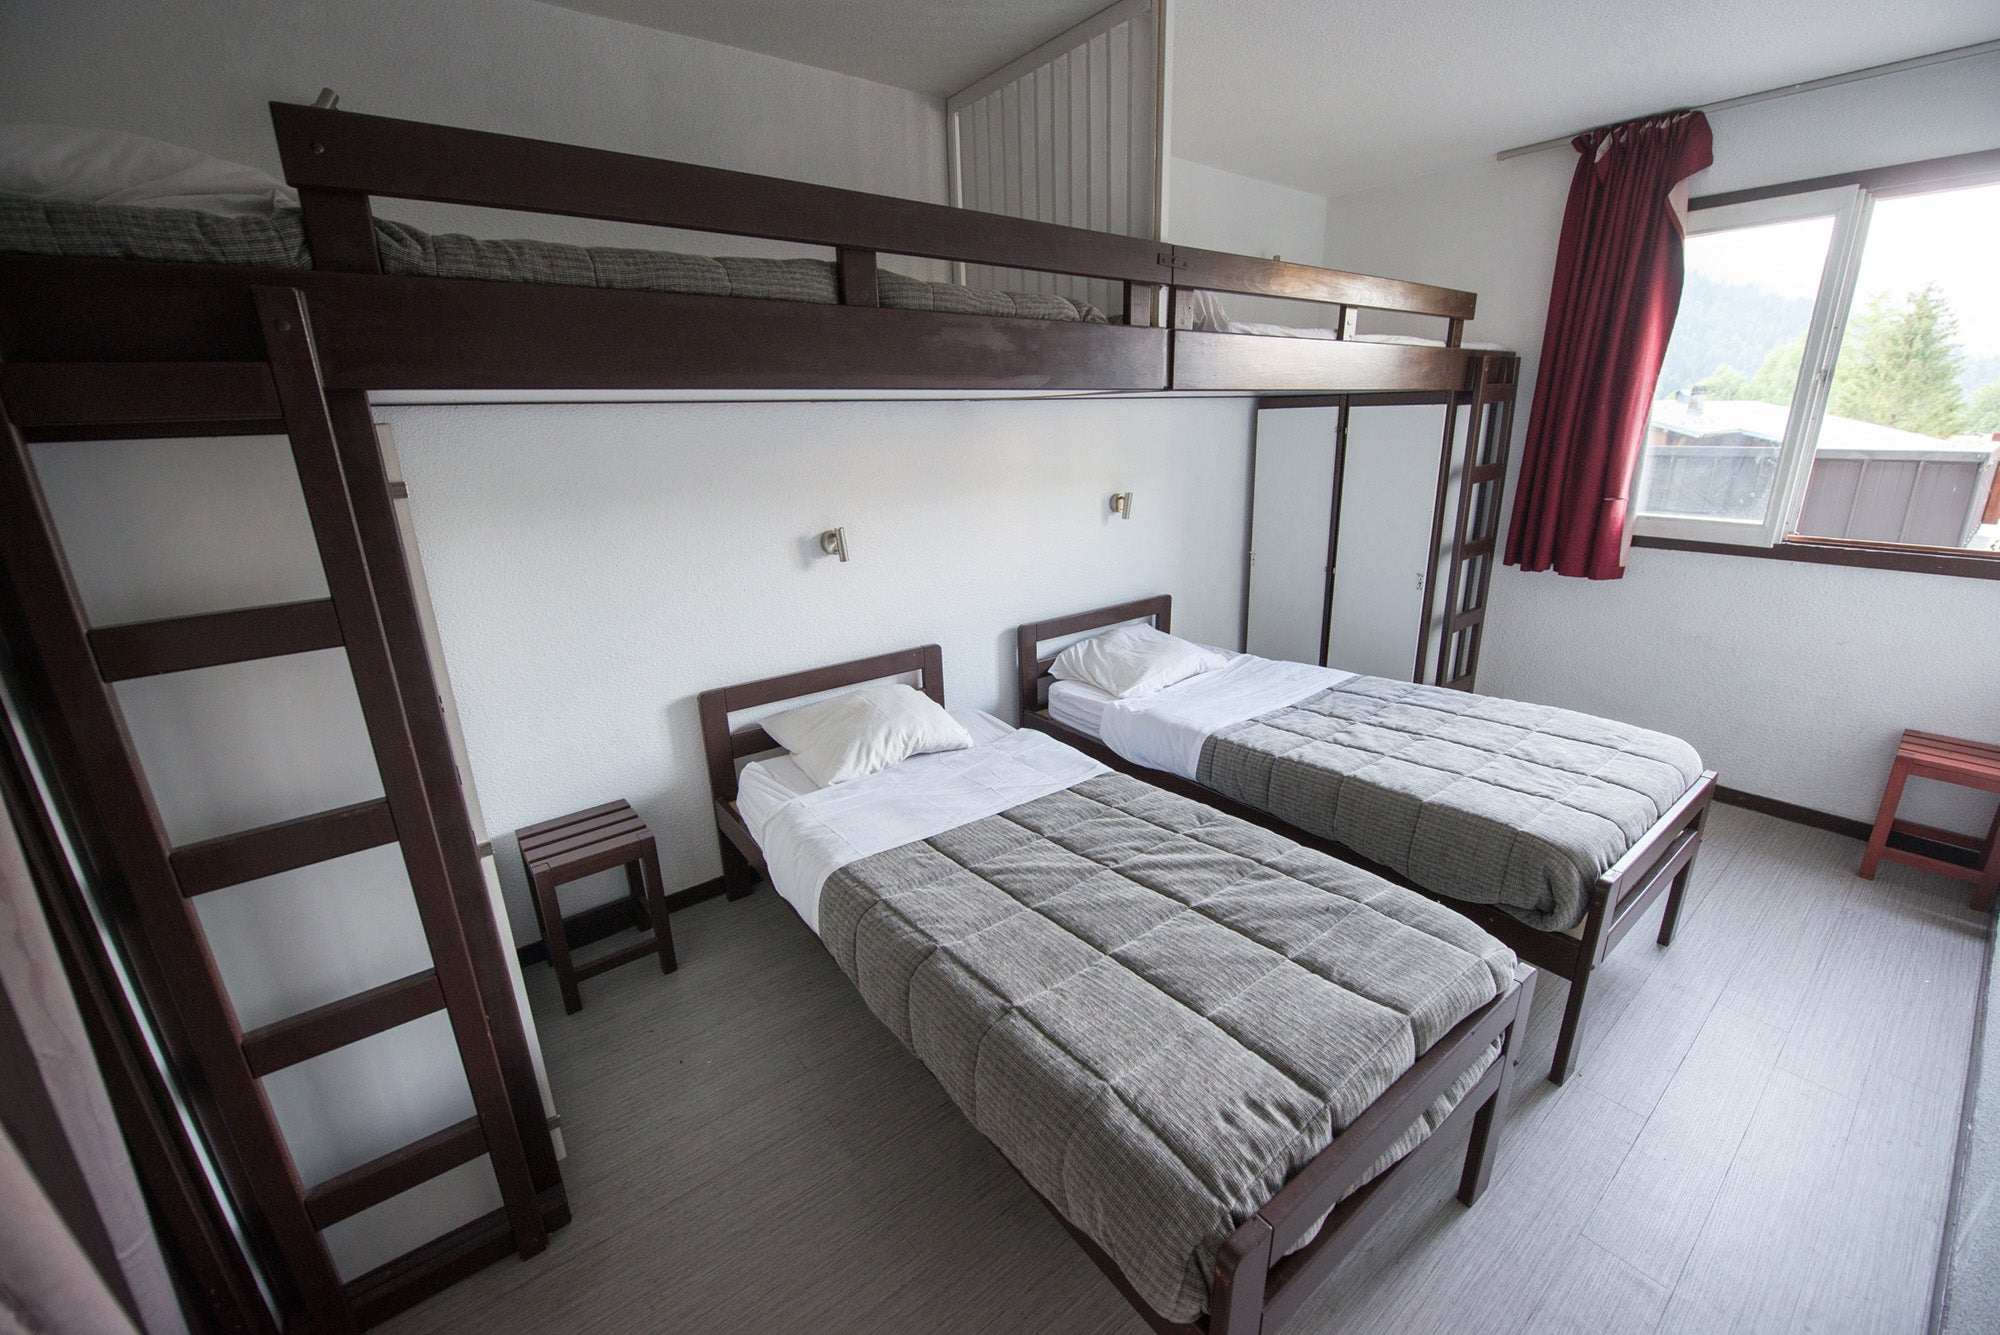 A four-bed room in the Les Contamines centre